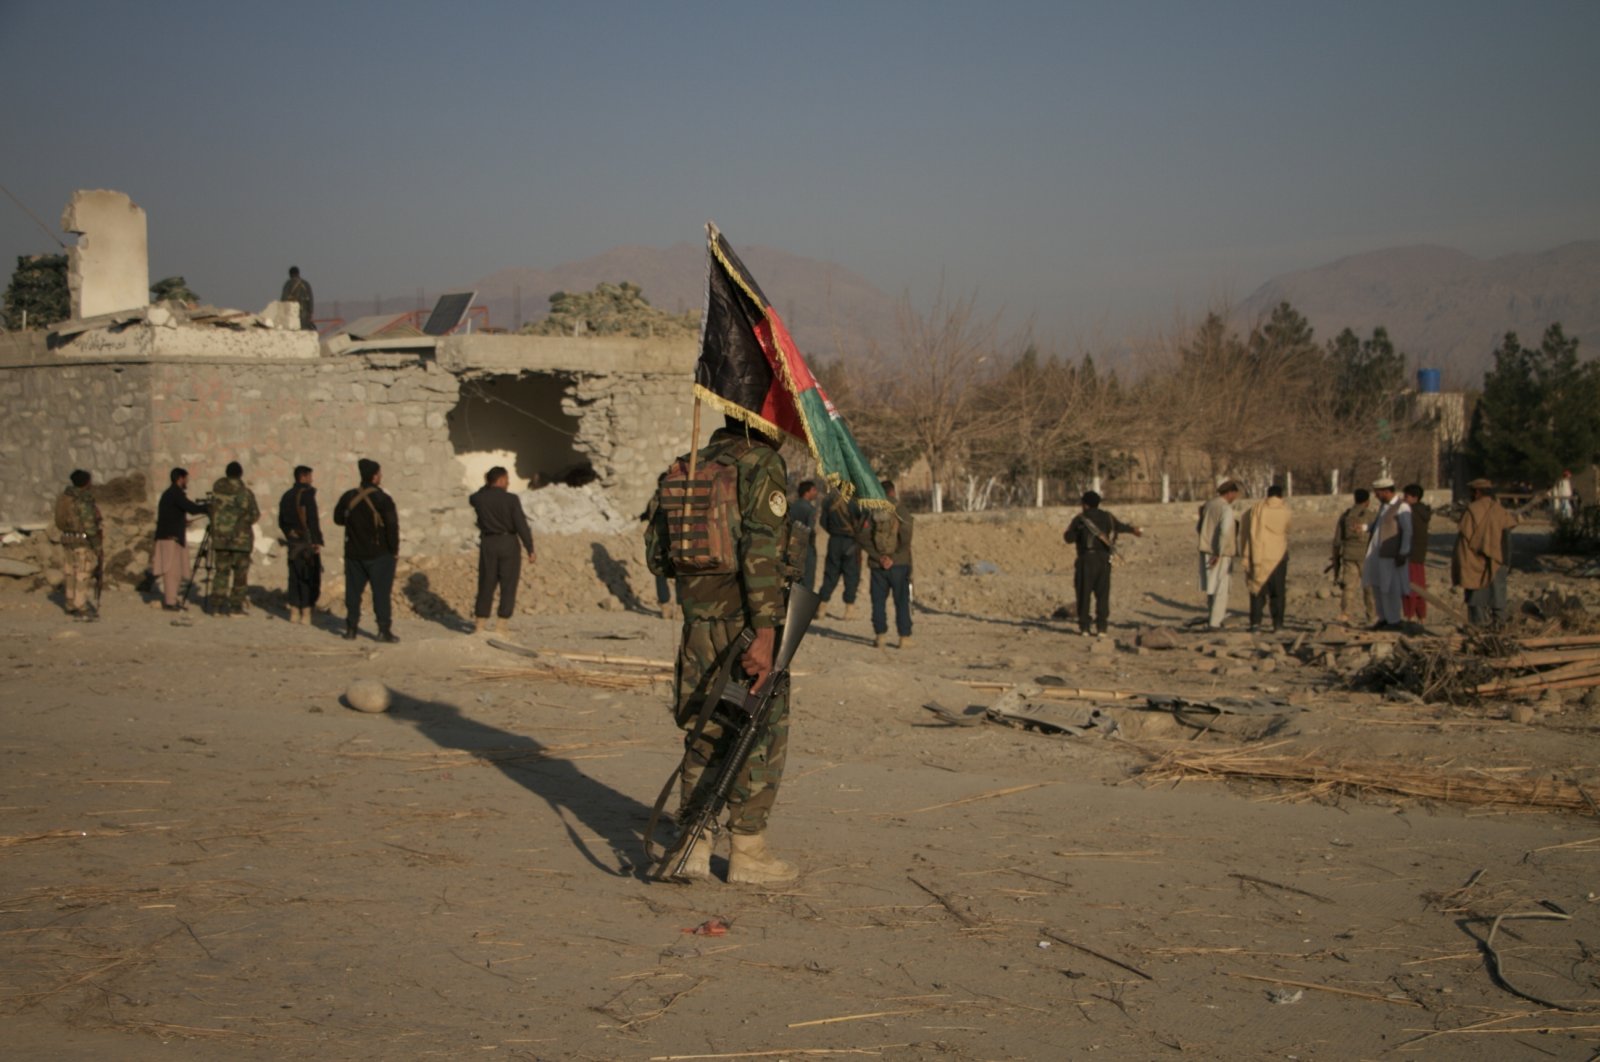 Afghan police officials inspect the scene of a suicide car bomb blast that targeted a police outpost on the outskirts of Khogyani district, Nangarhar province, Afghanistan, Feb. 7, 2021. (Getty Images)